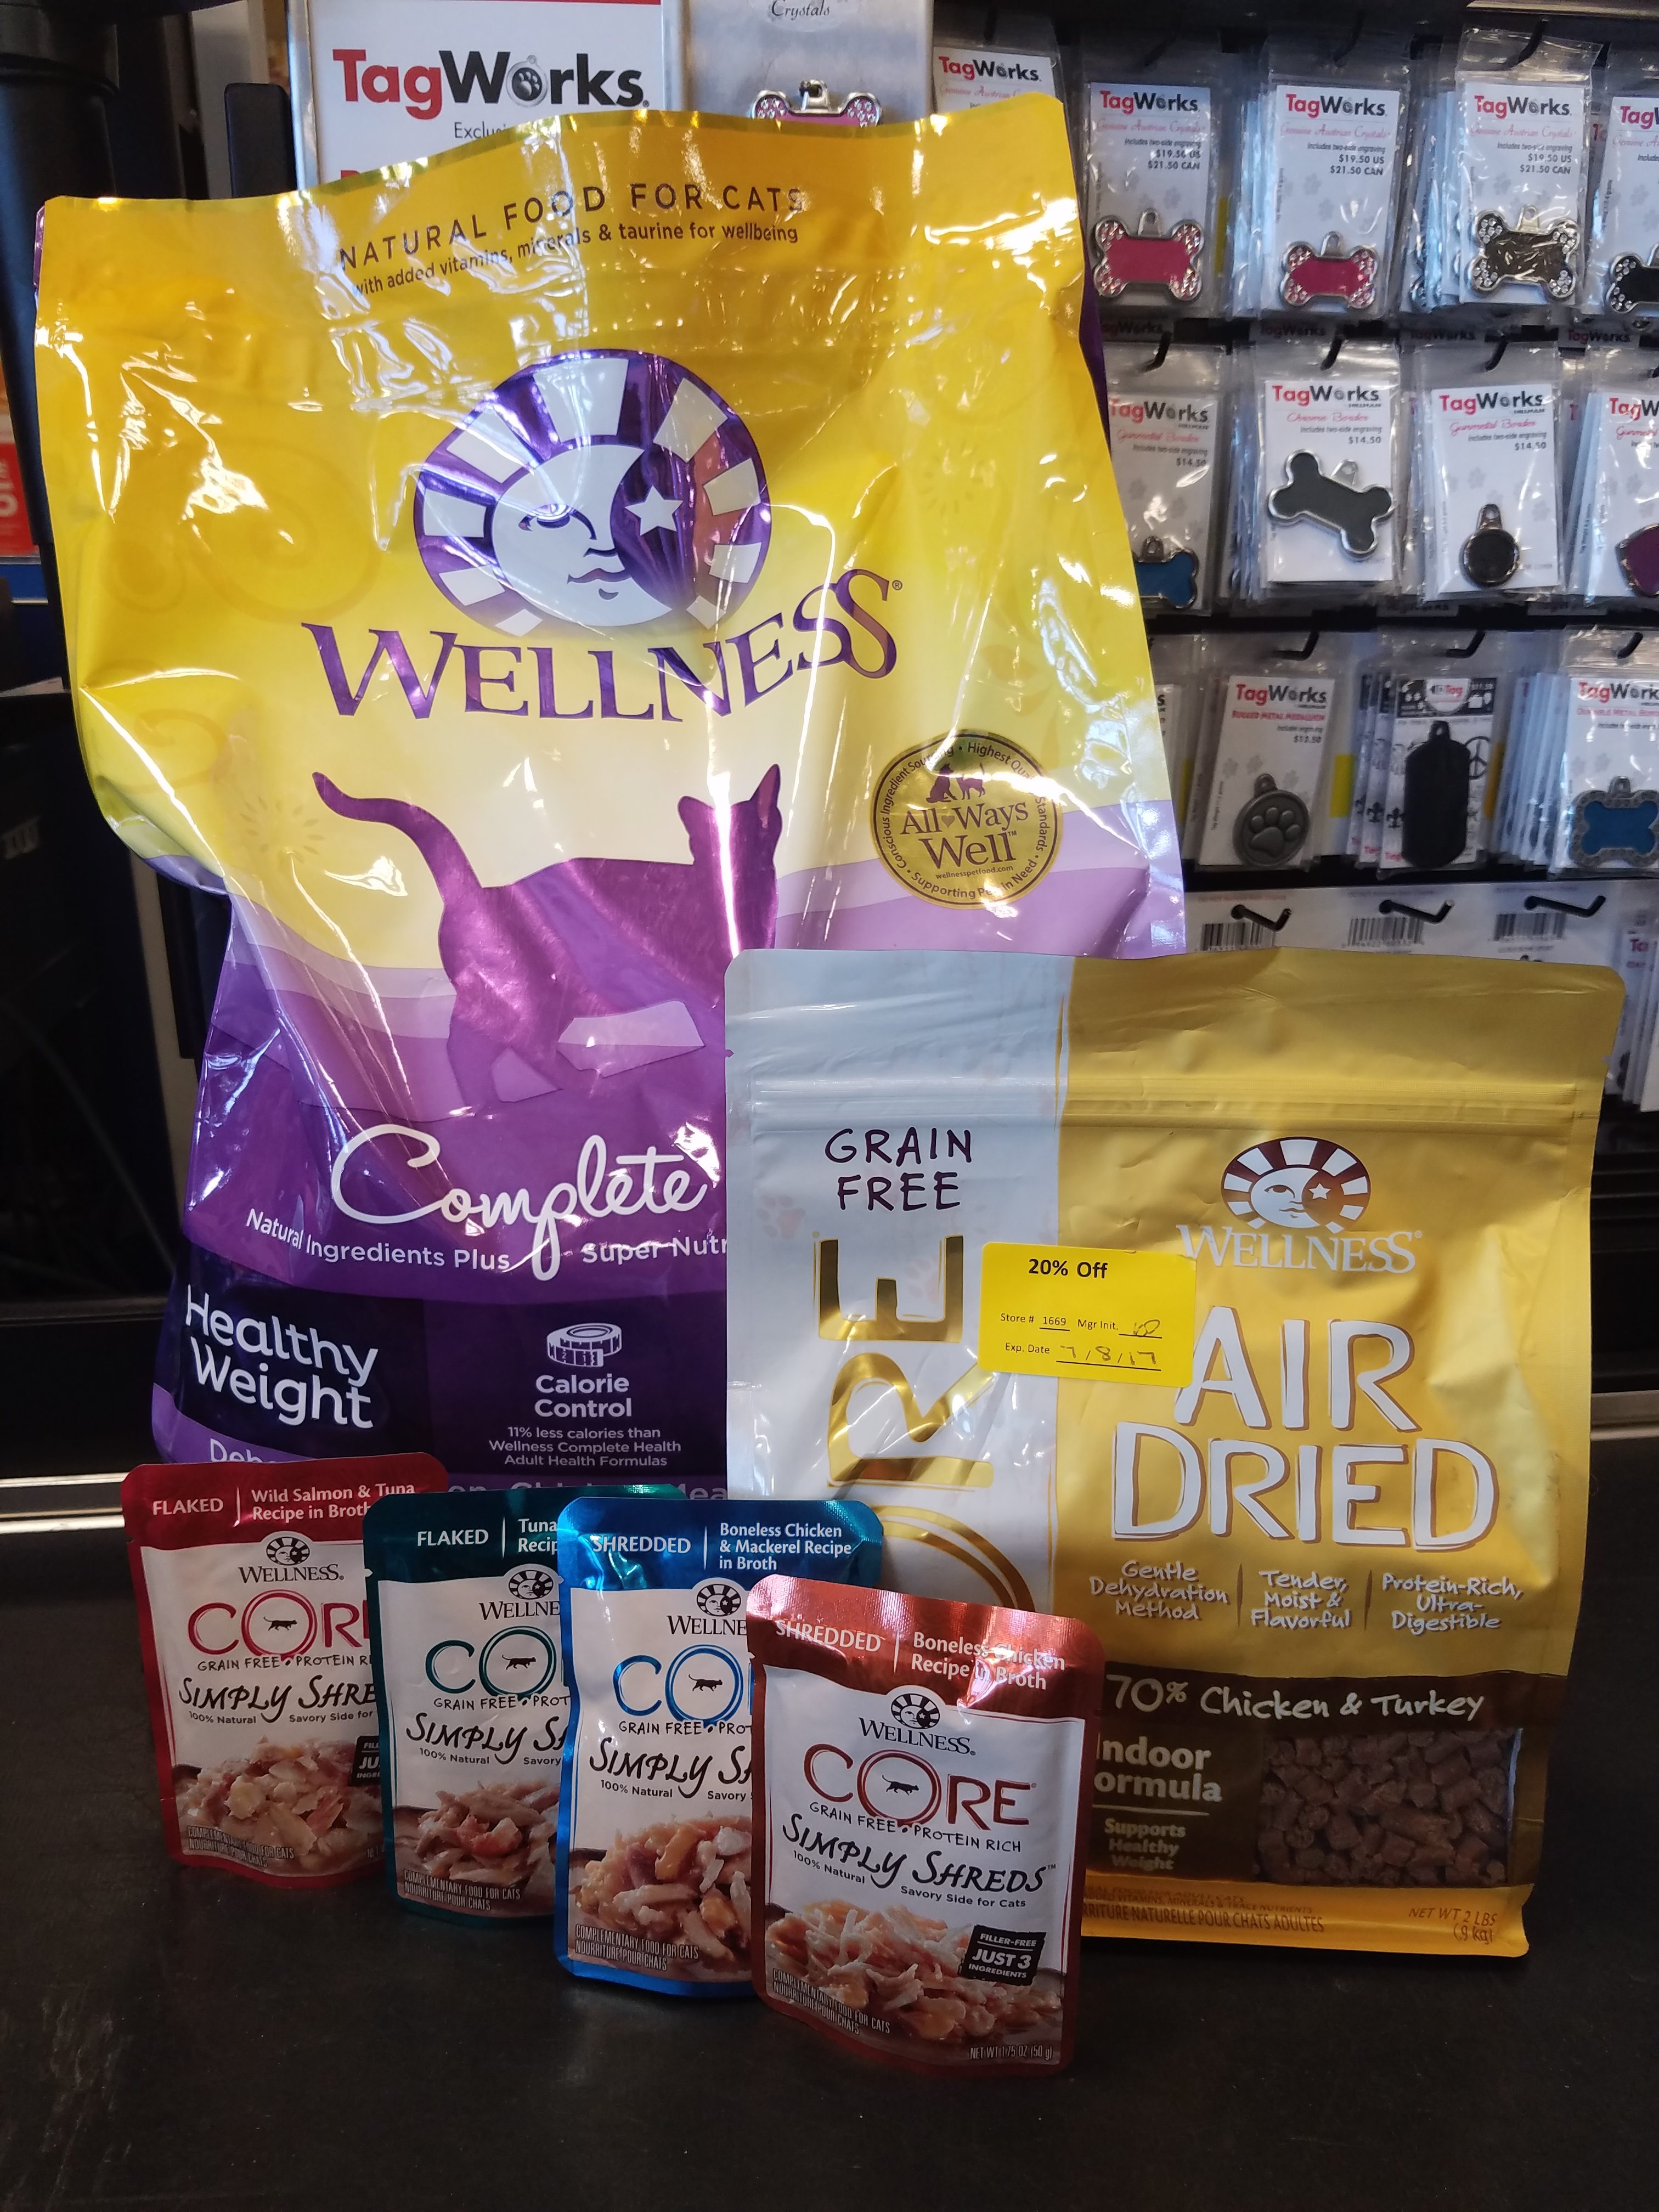 I love my cats and I want only the very best for them. Wellness brand cat food is grain free and offers complete health